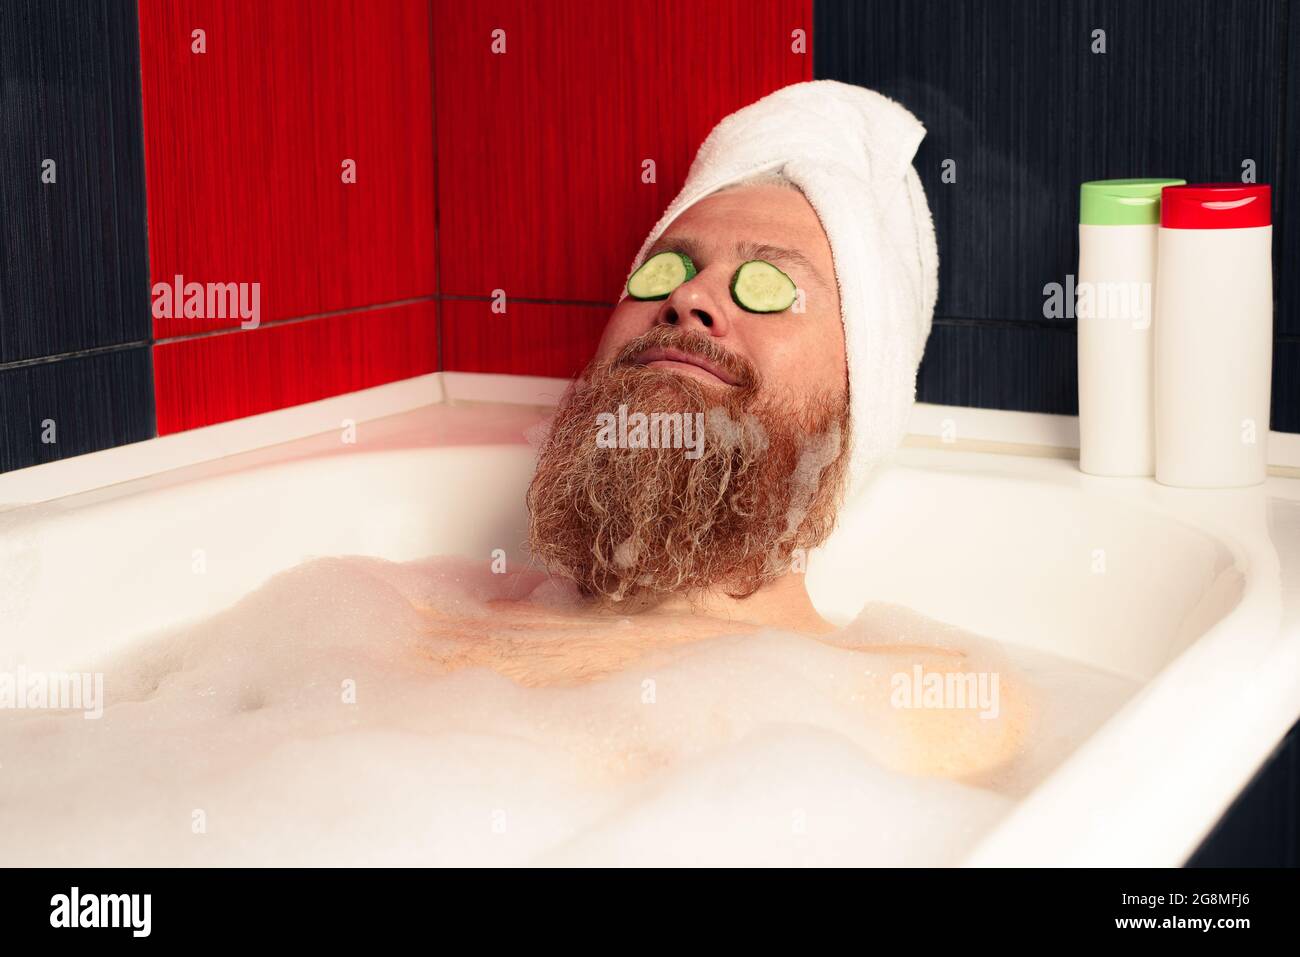 Cute bearded man taking bath with head wrapped in towel and cucumber slices on his eyes. Funny hipster relaxing in foamy bathtub and enjoying life Stock Photo